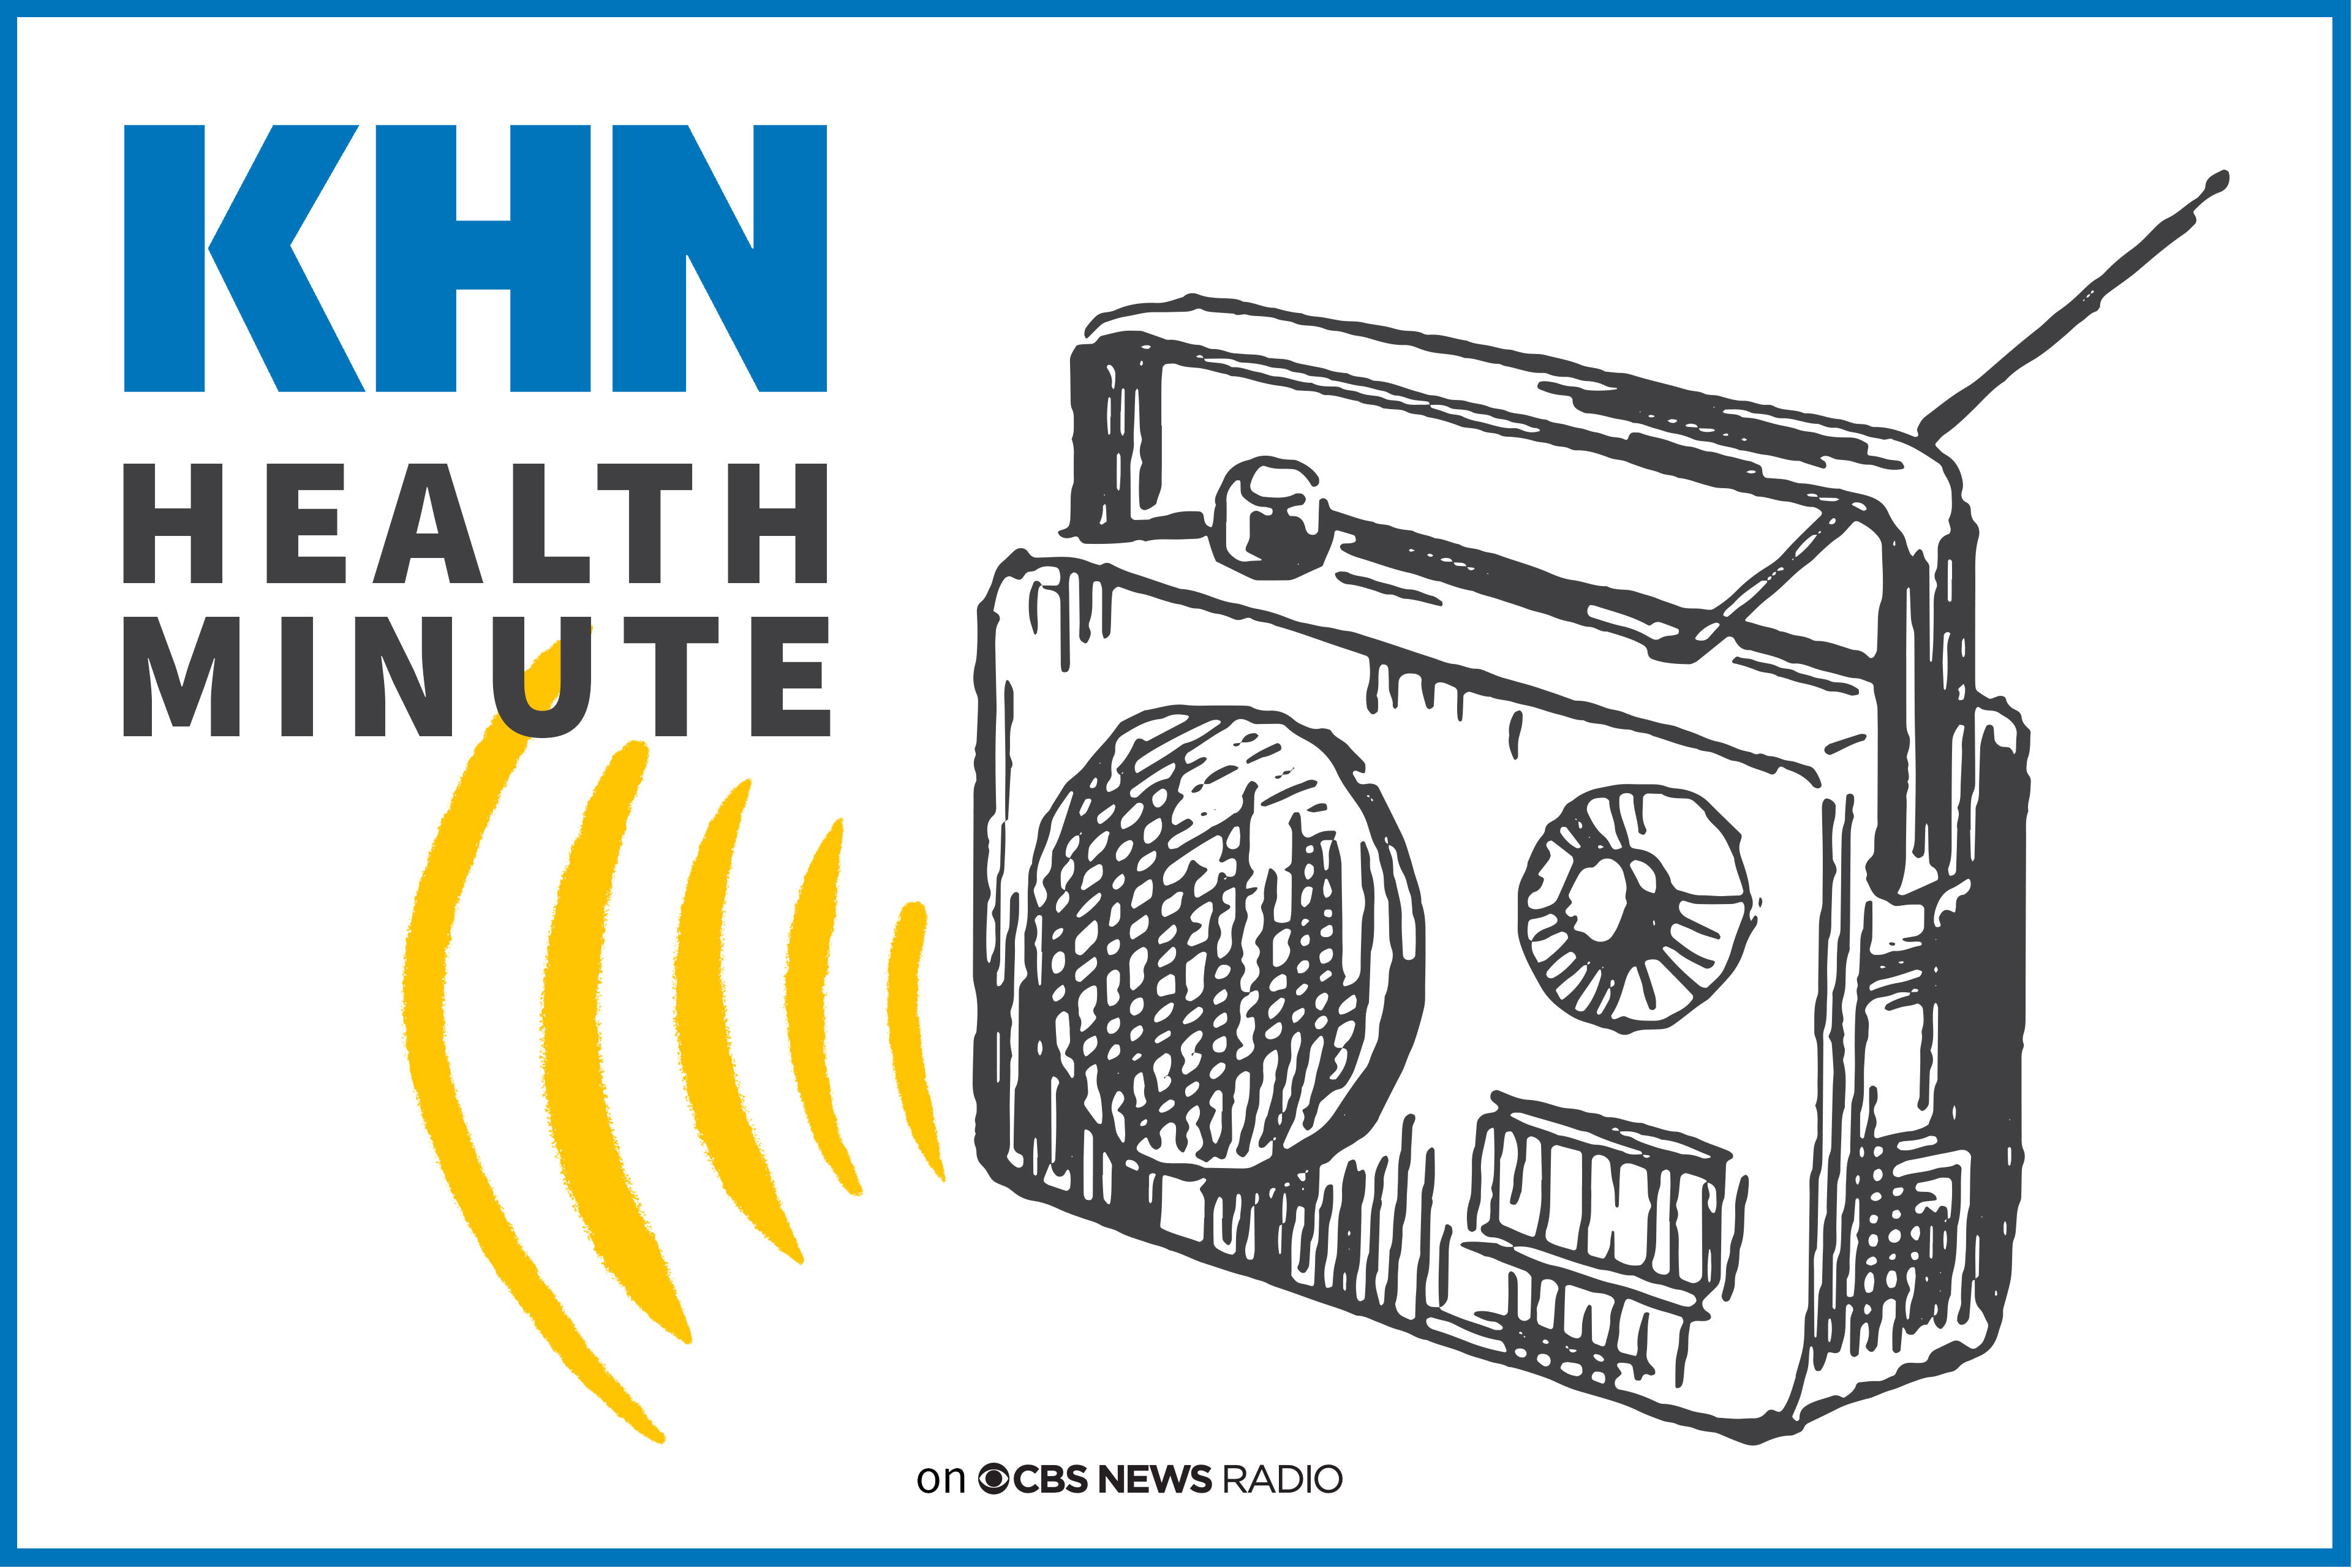 Listen to the Latest ‘KHN Health Minute’